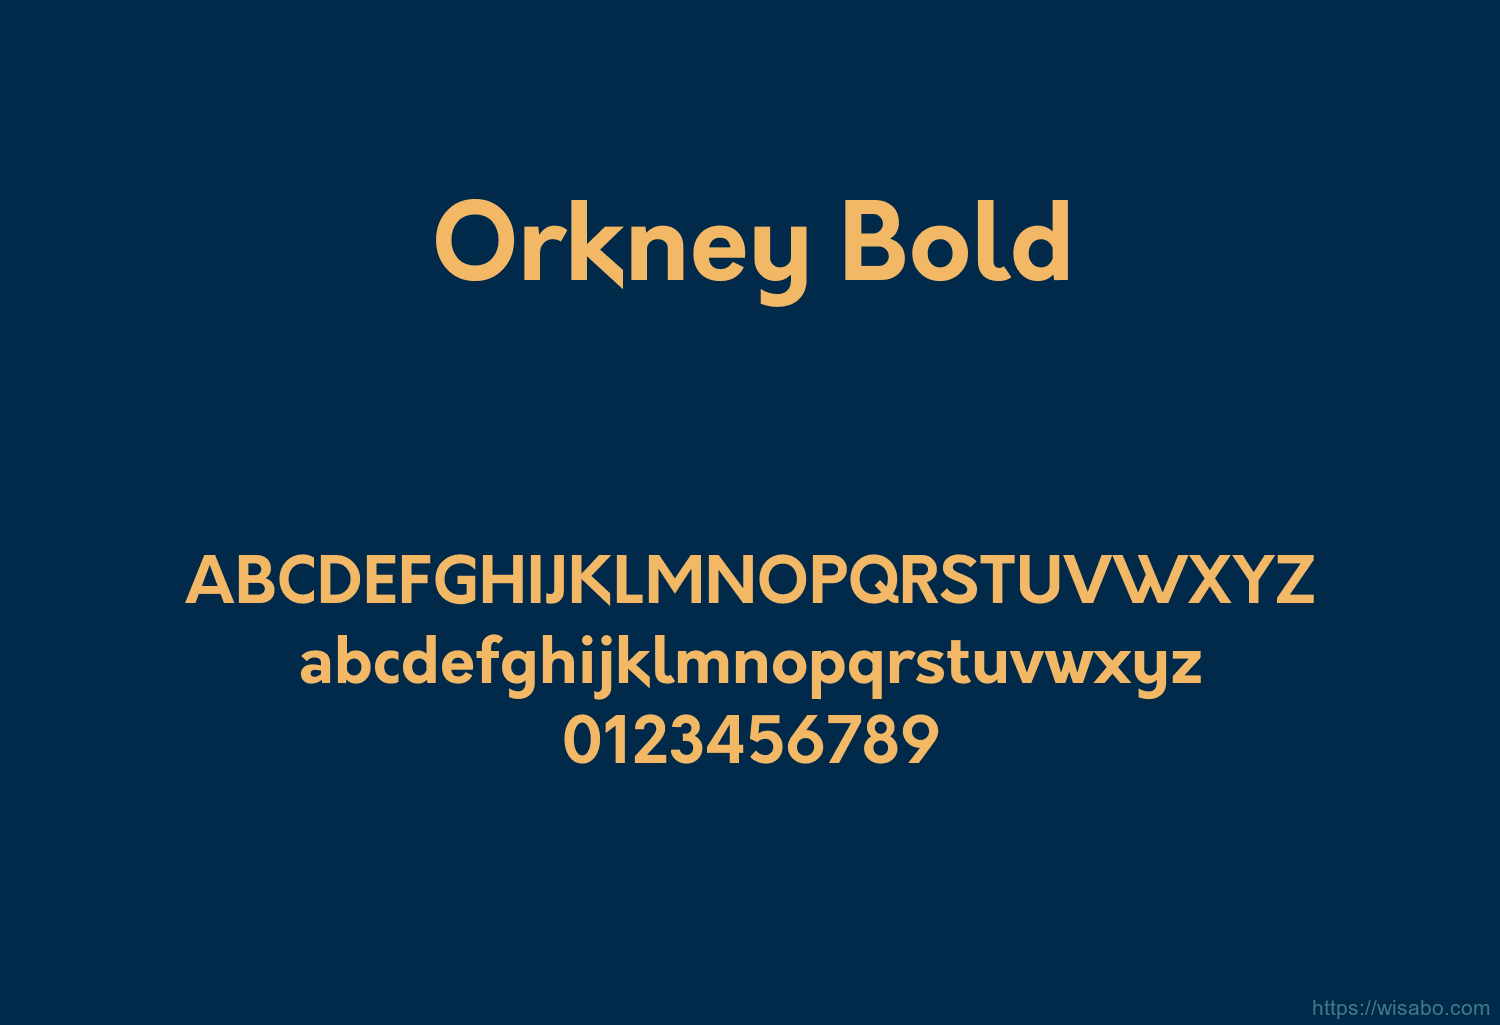 Orkney Bold